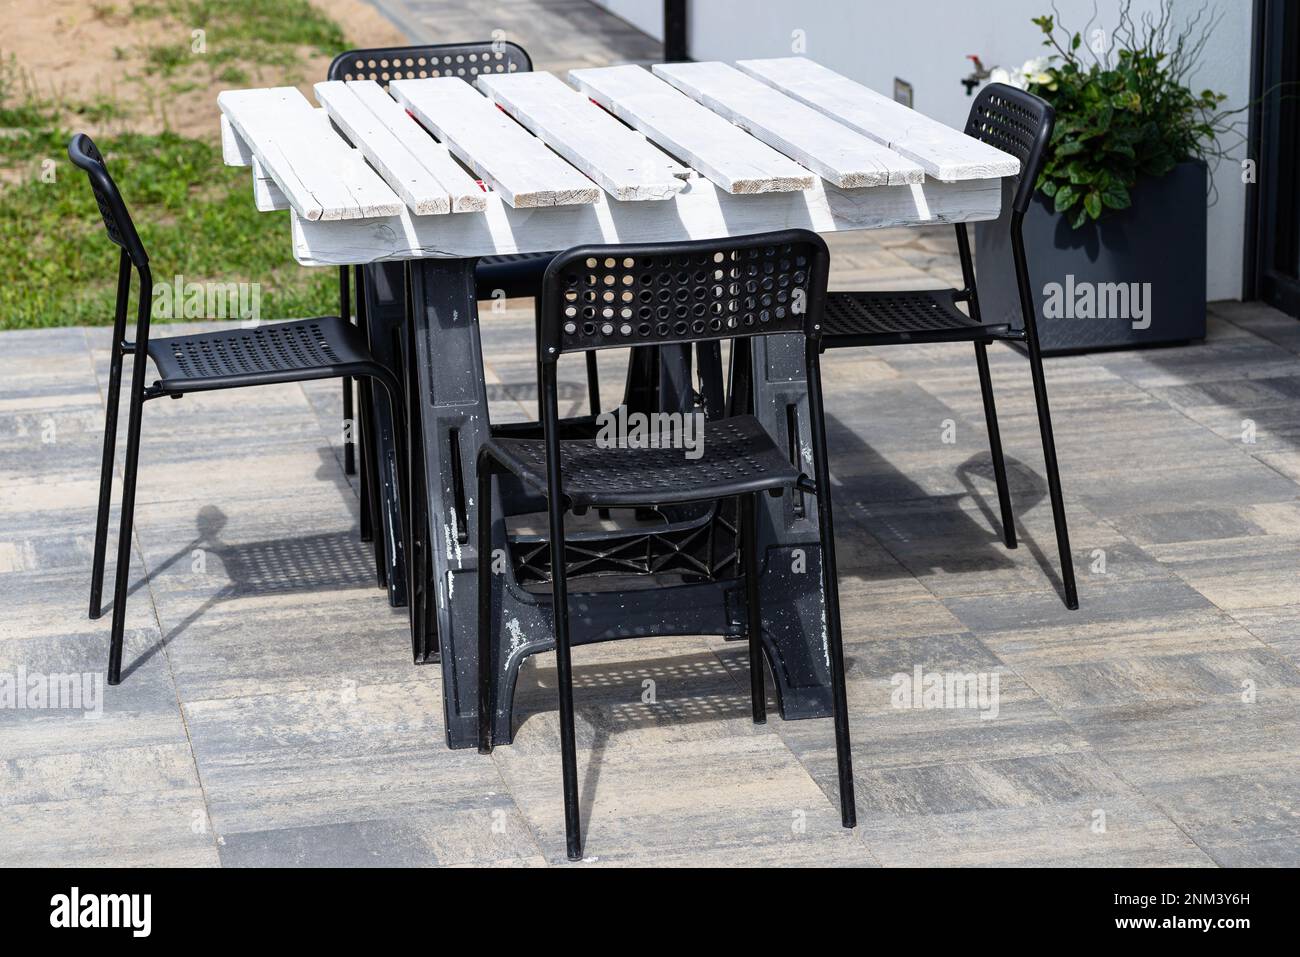 Terrace table made of white pallet standing on plastic trestles, black plastic chairs. Stock Photo